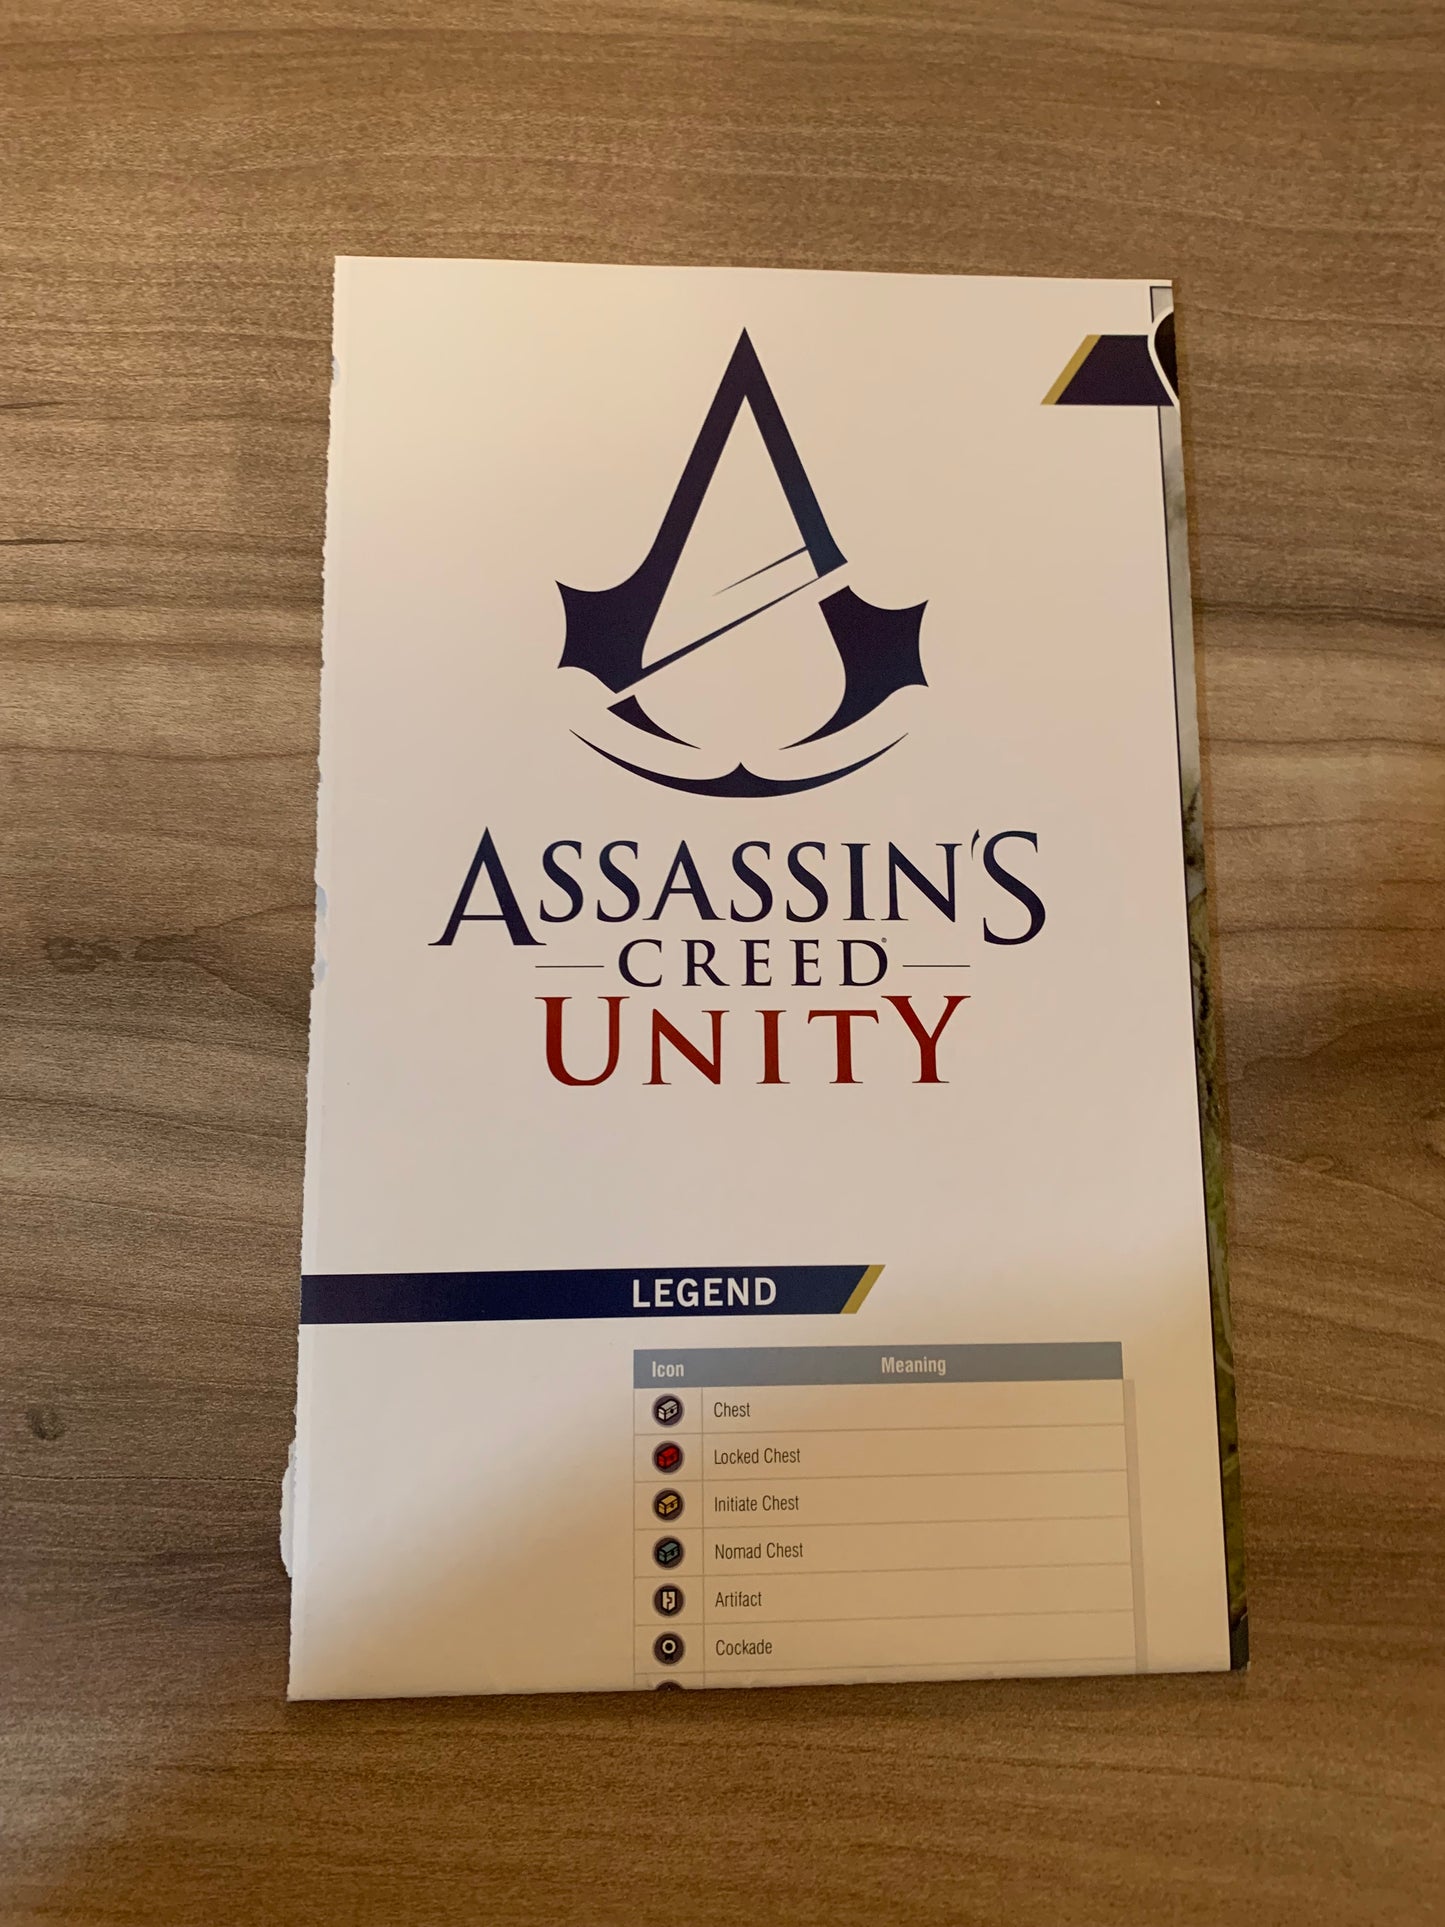 ASSASSiNS CREED UNiTY STRATEGY GUiDE PiGGYBACK COLLECTORS EDiTiON